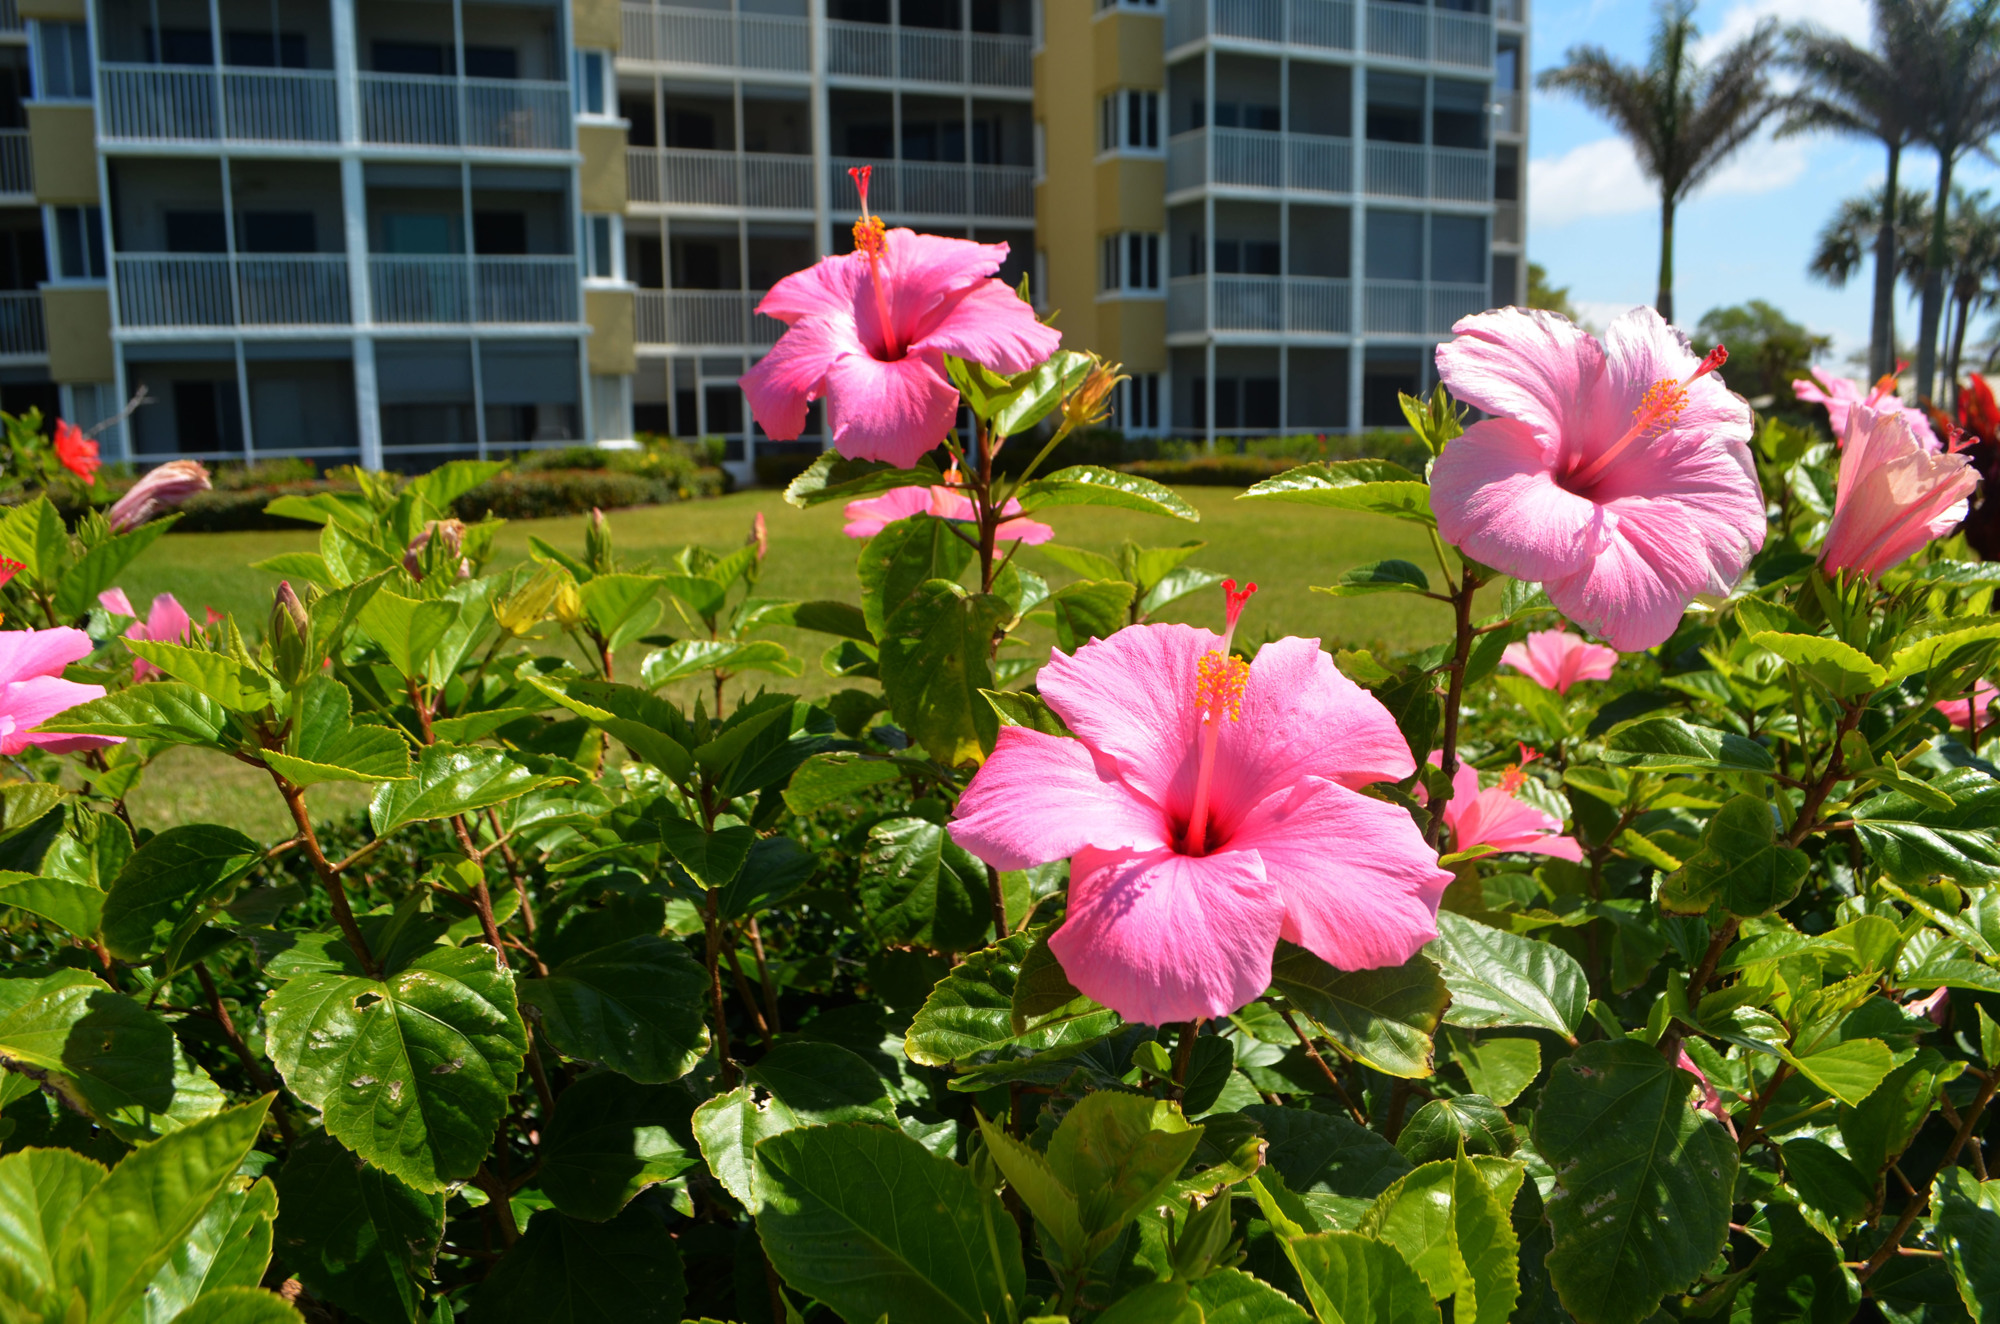 The pool deck is surrounded by colorful flowers, including pink hibiscus.